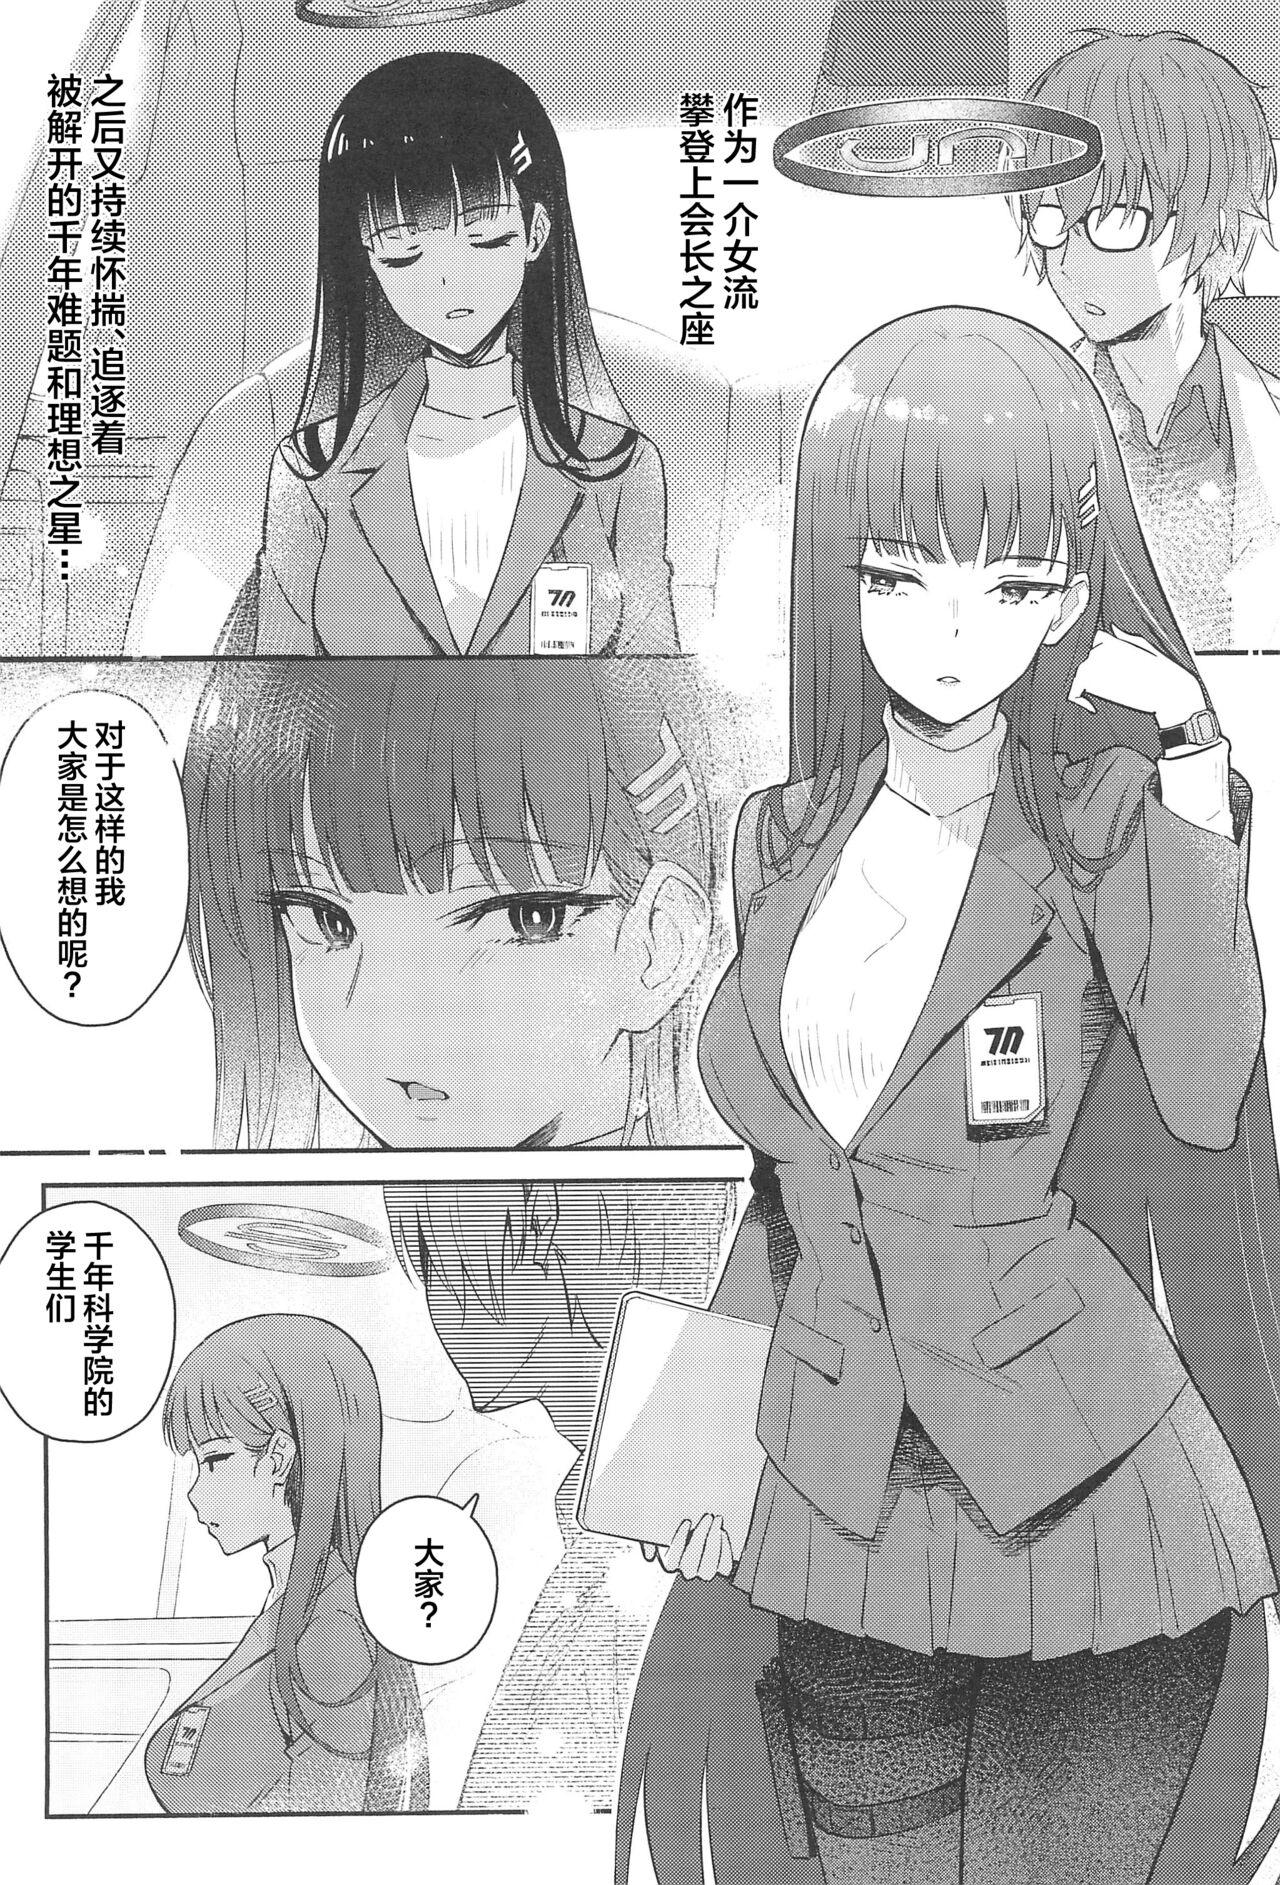 Tiny Girl (C102) [Shiro no Ie (Yochiki)] Rio-chan wa Otosaretai. - Rio Want To Be Fall in Love (Blue Archive) - Blue archive Gay Trimmed - Page 4